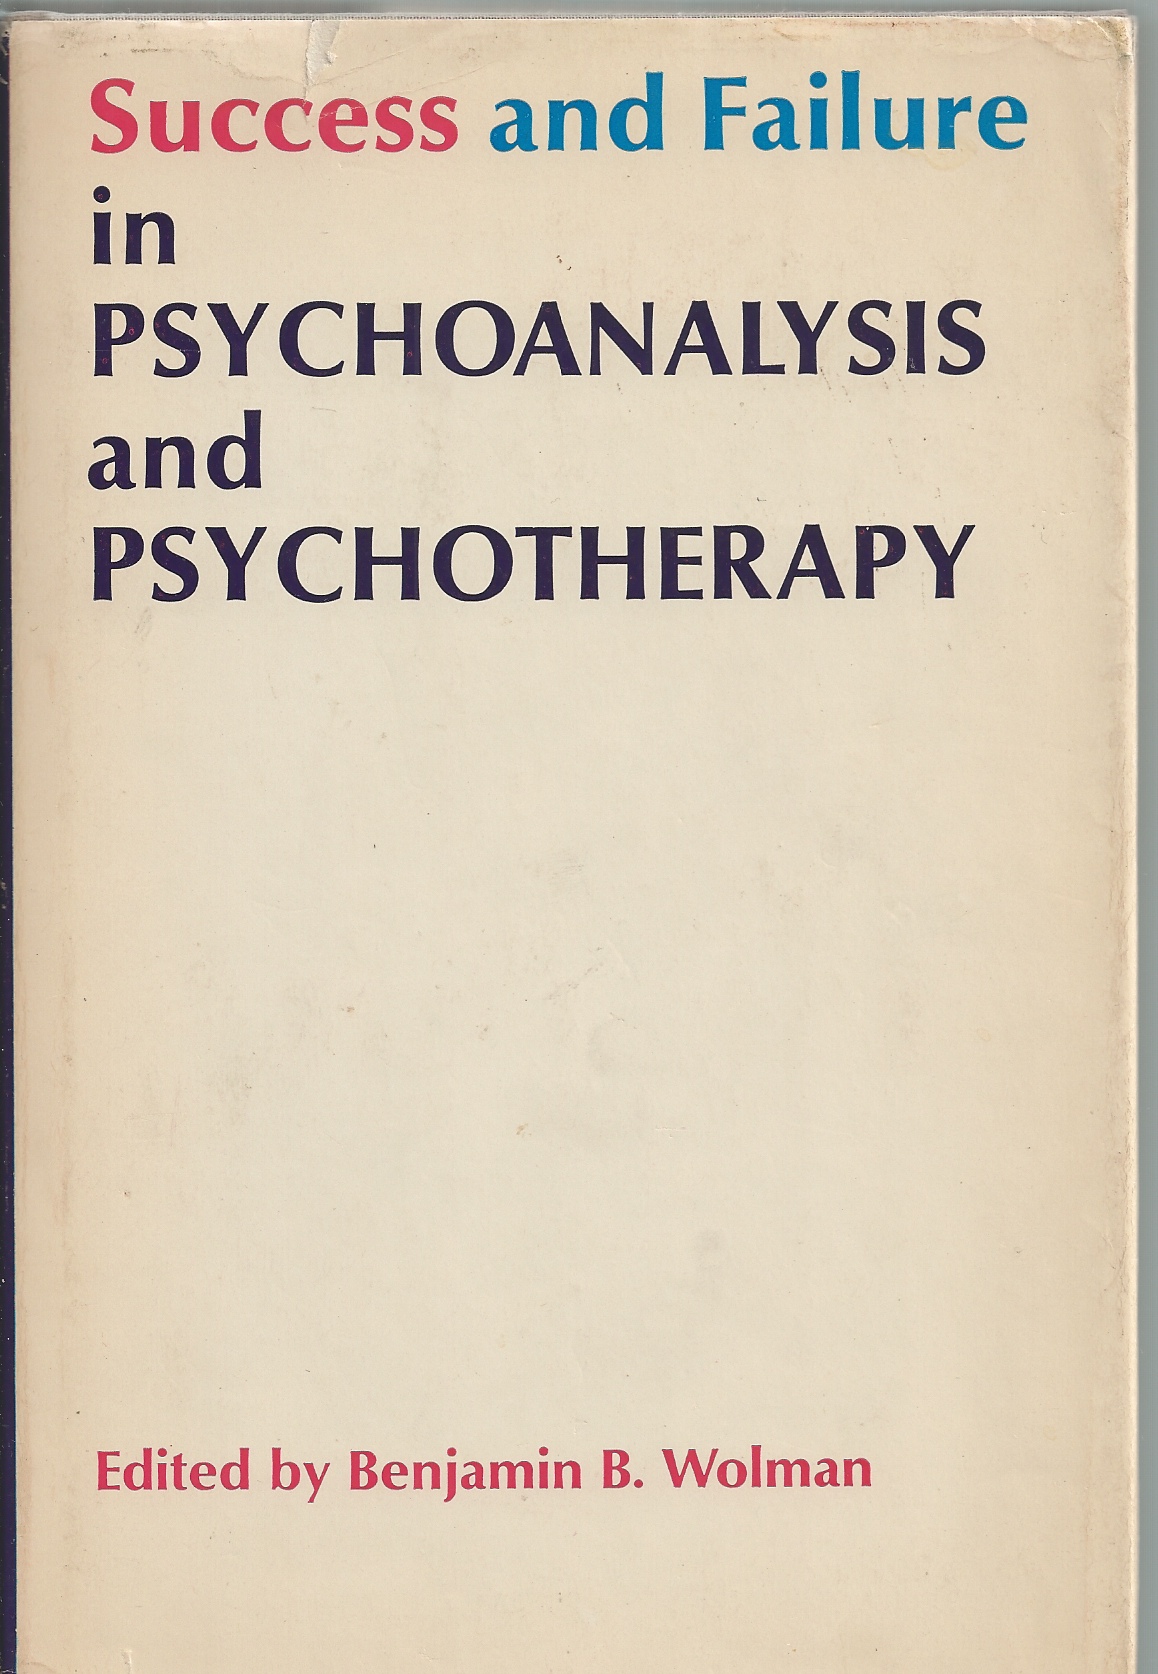 WOLMAN BENJAMIN B. - Success and Failure in Psychoanalysis and Psychotherapy